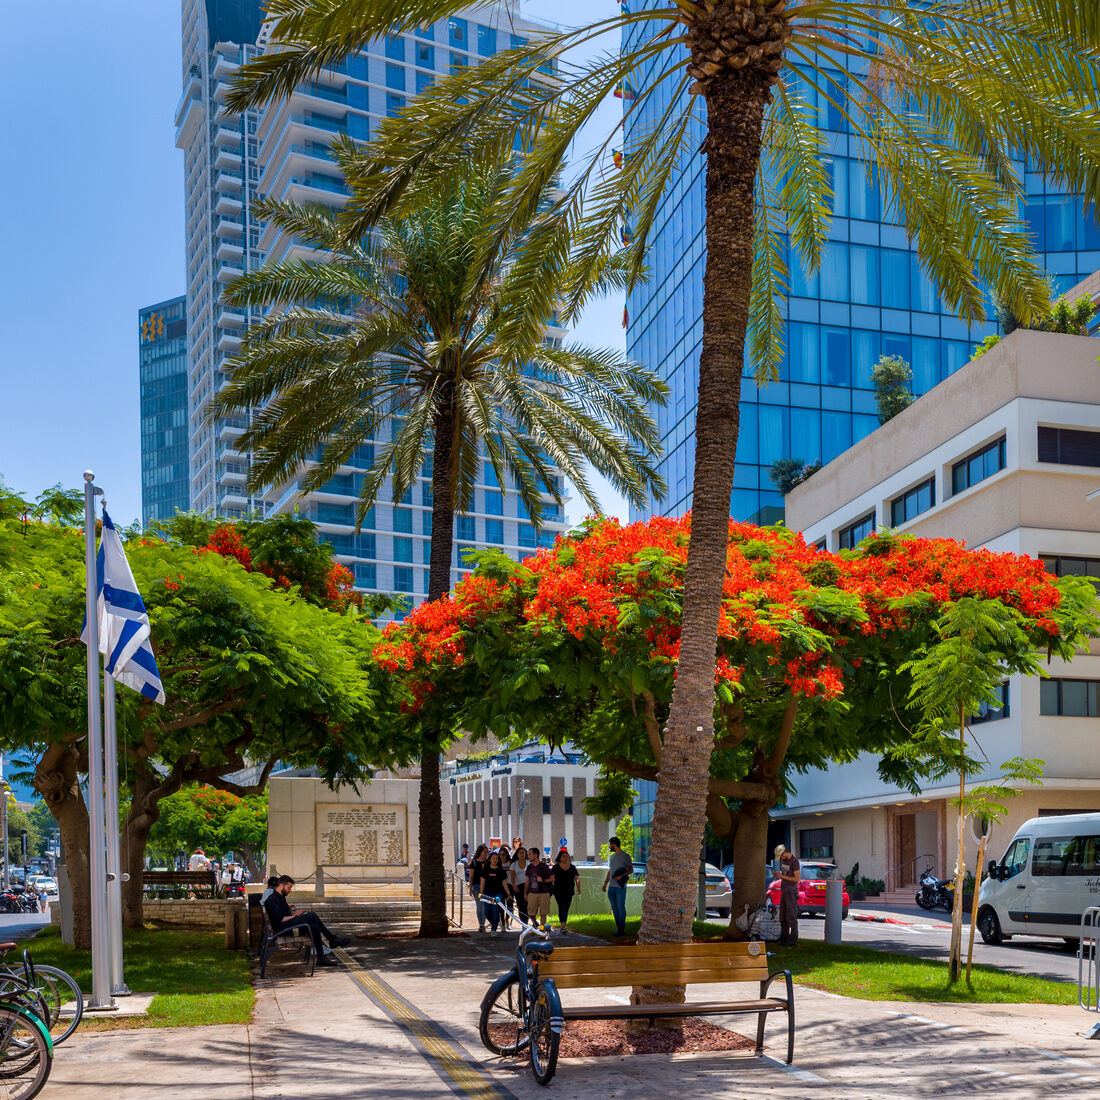 Rothschild Boulevard is one of Tel Aviv's most famous streets, and with good reason. Photo by Boris-b, Shutterstock